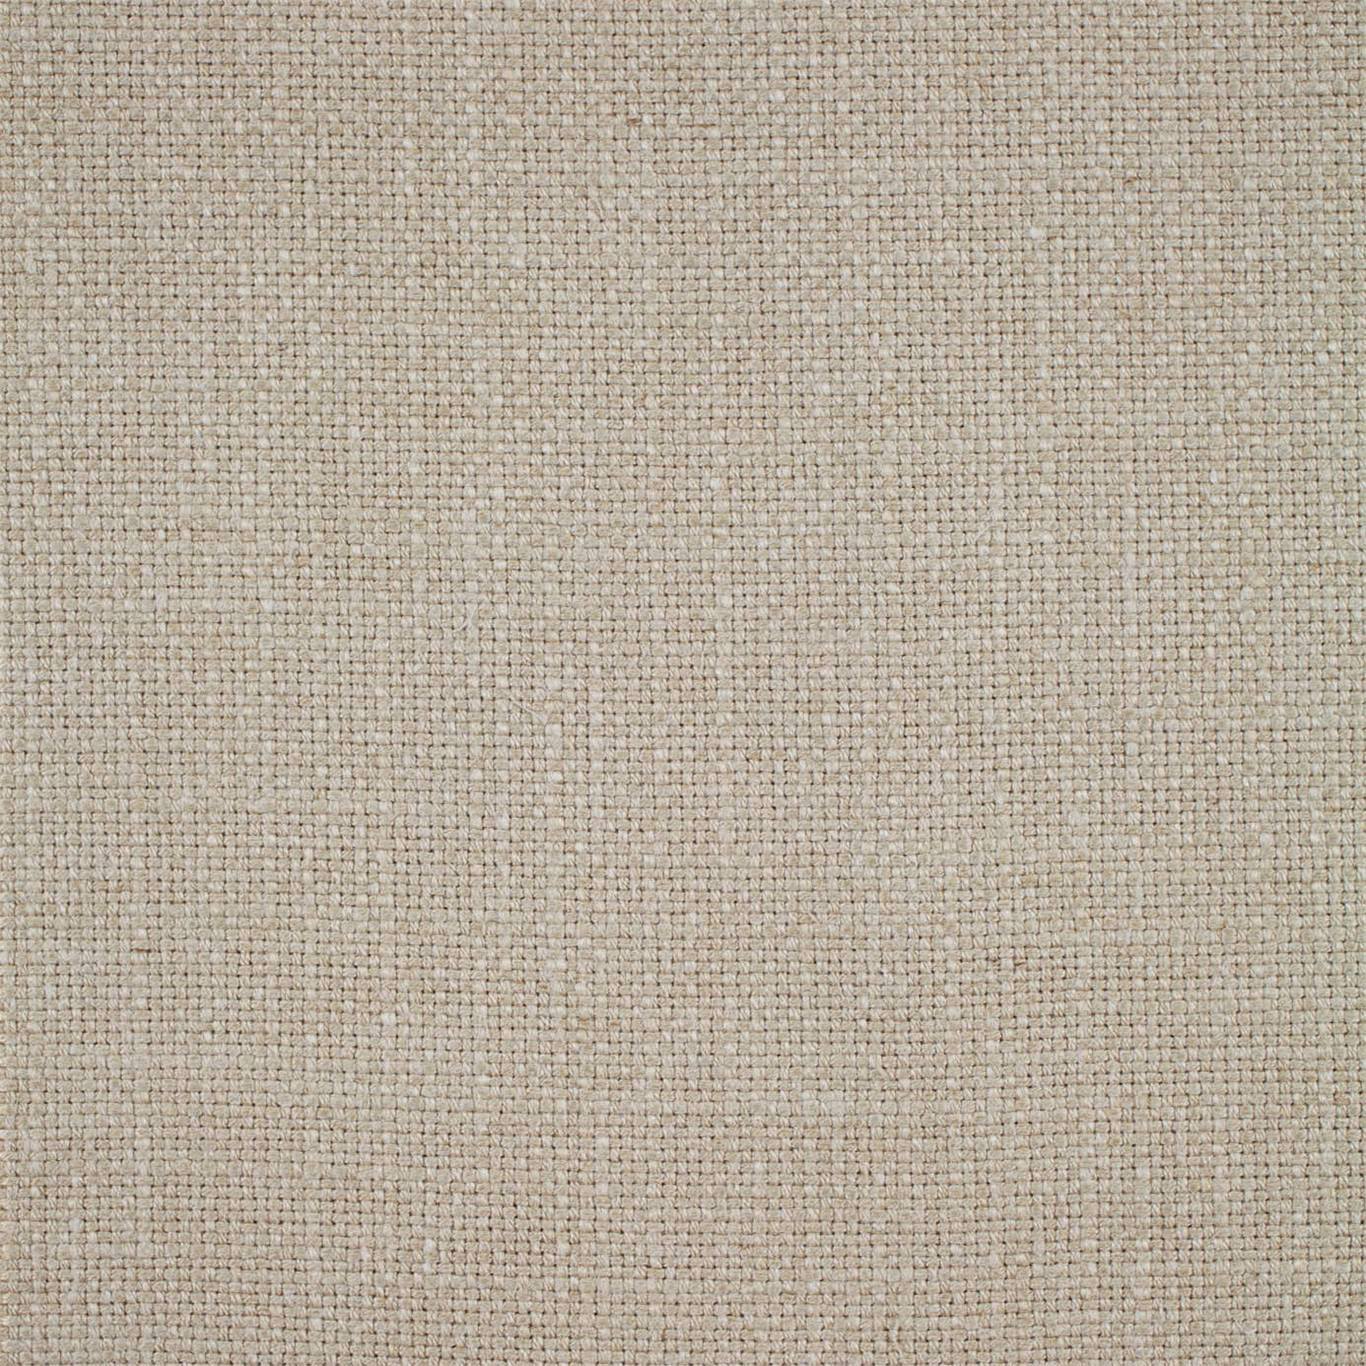 Tuscany Ii Parchment Fabric by SAN